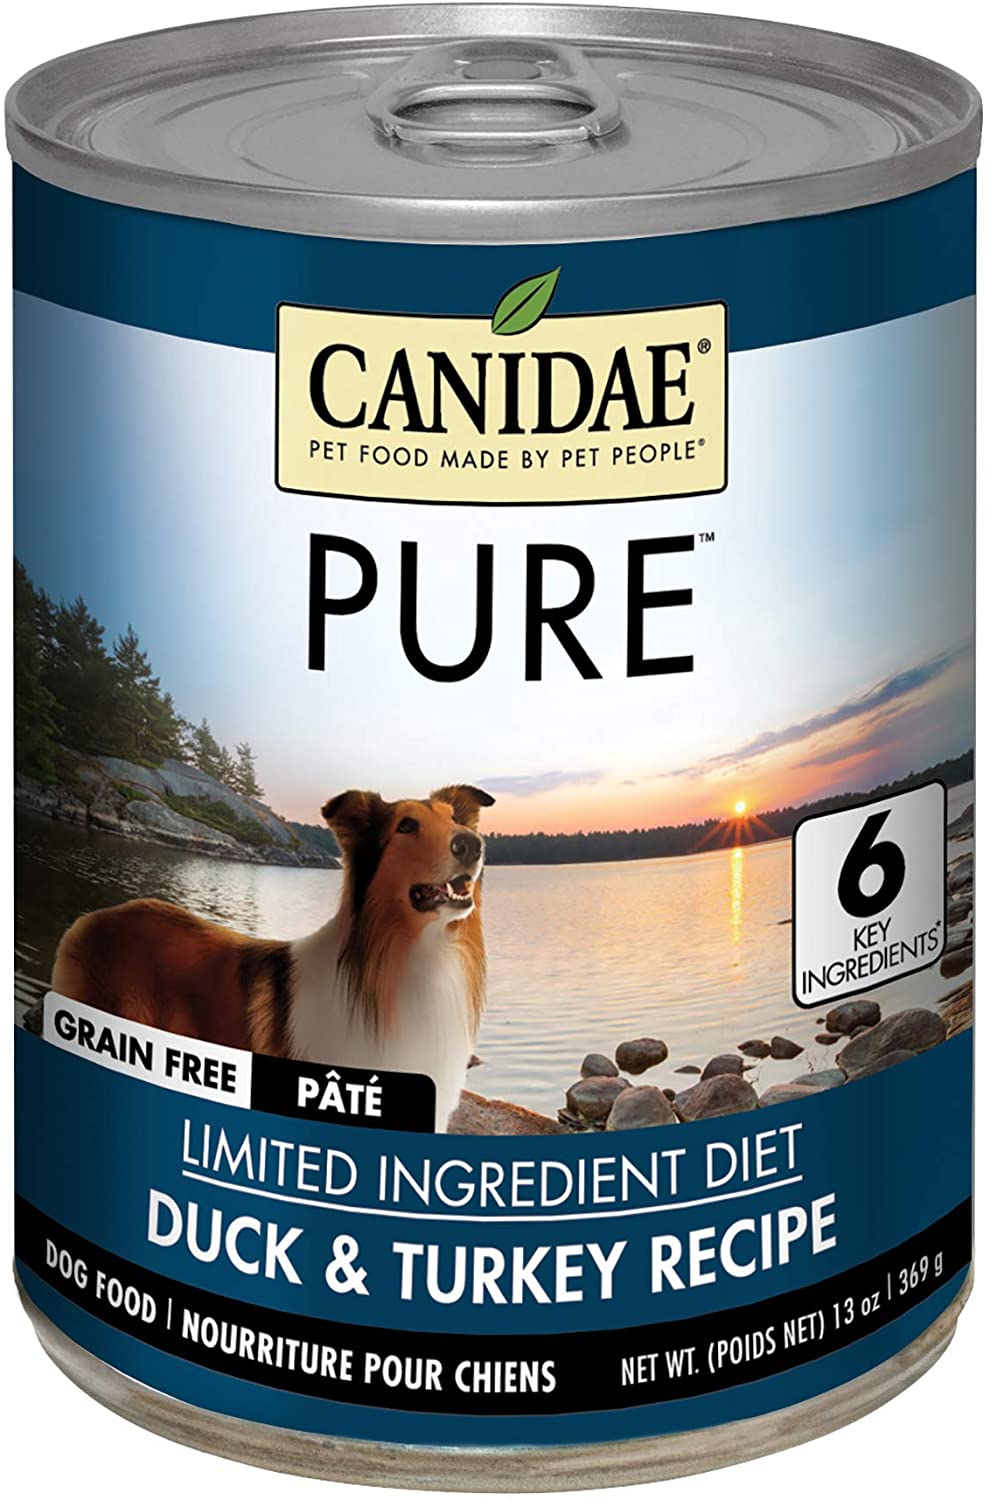 Canidae PURE Grain Free Duck & Turkey Recipe for Dogs, 13 oz